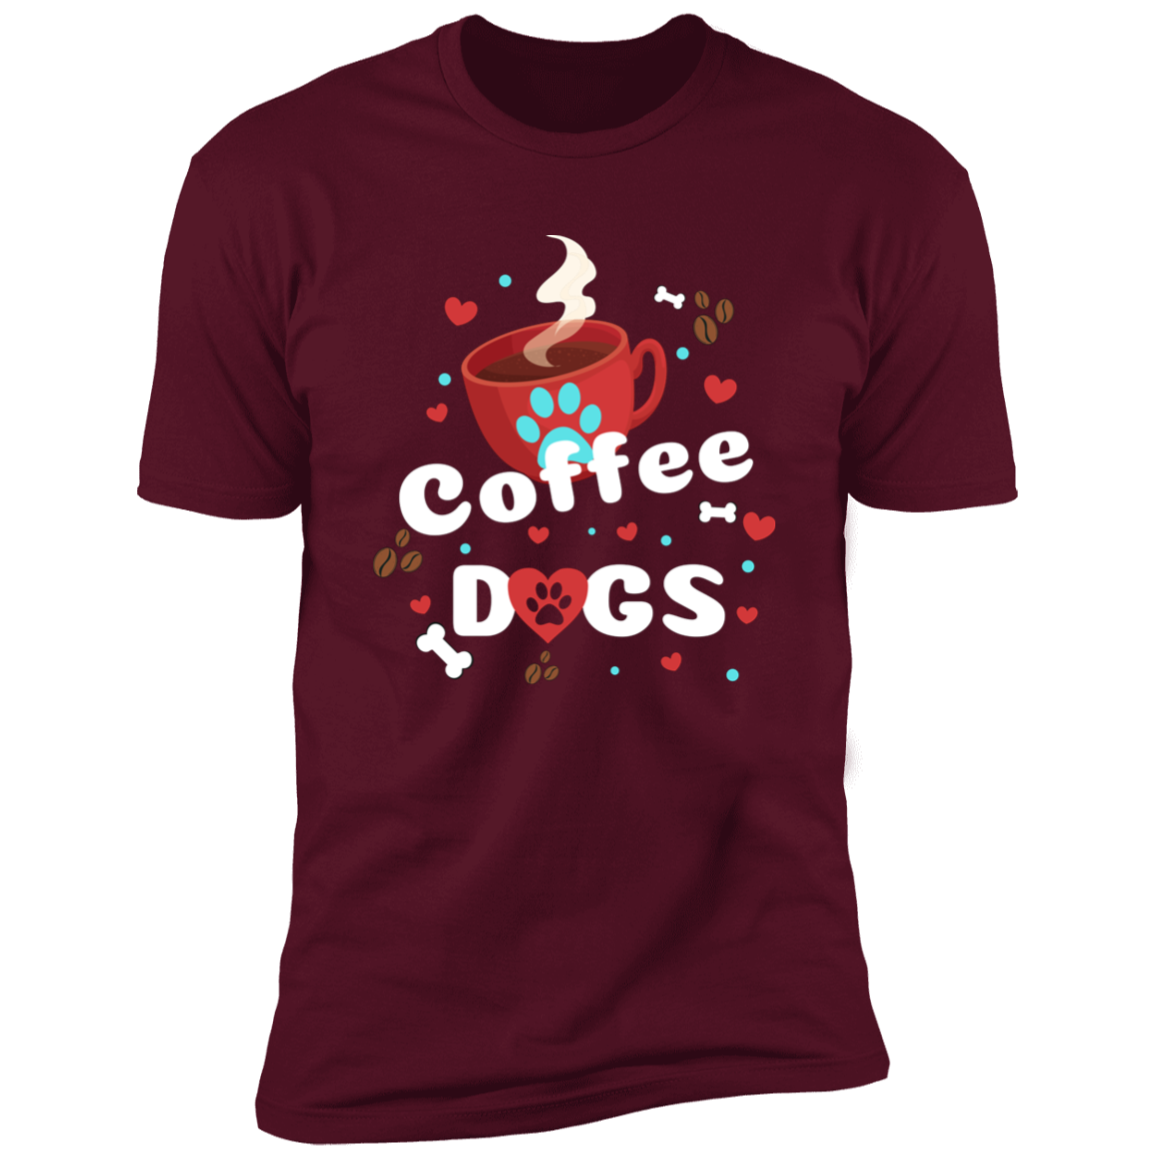 Coffee Dogs T-shirt, Dog Shirt for humans, in maroon